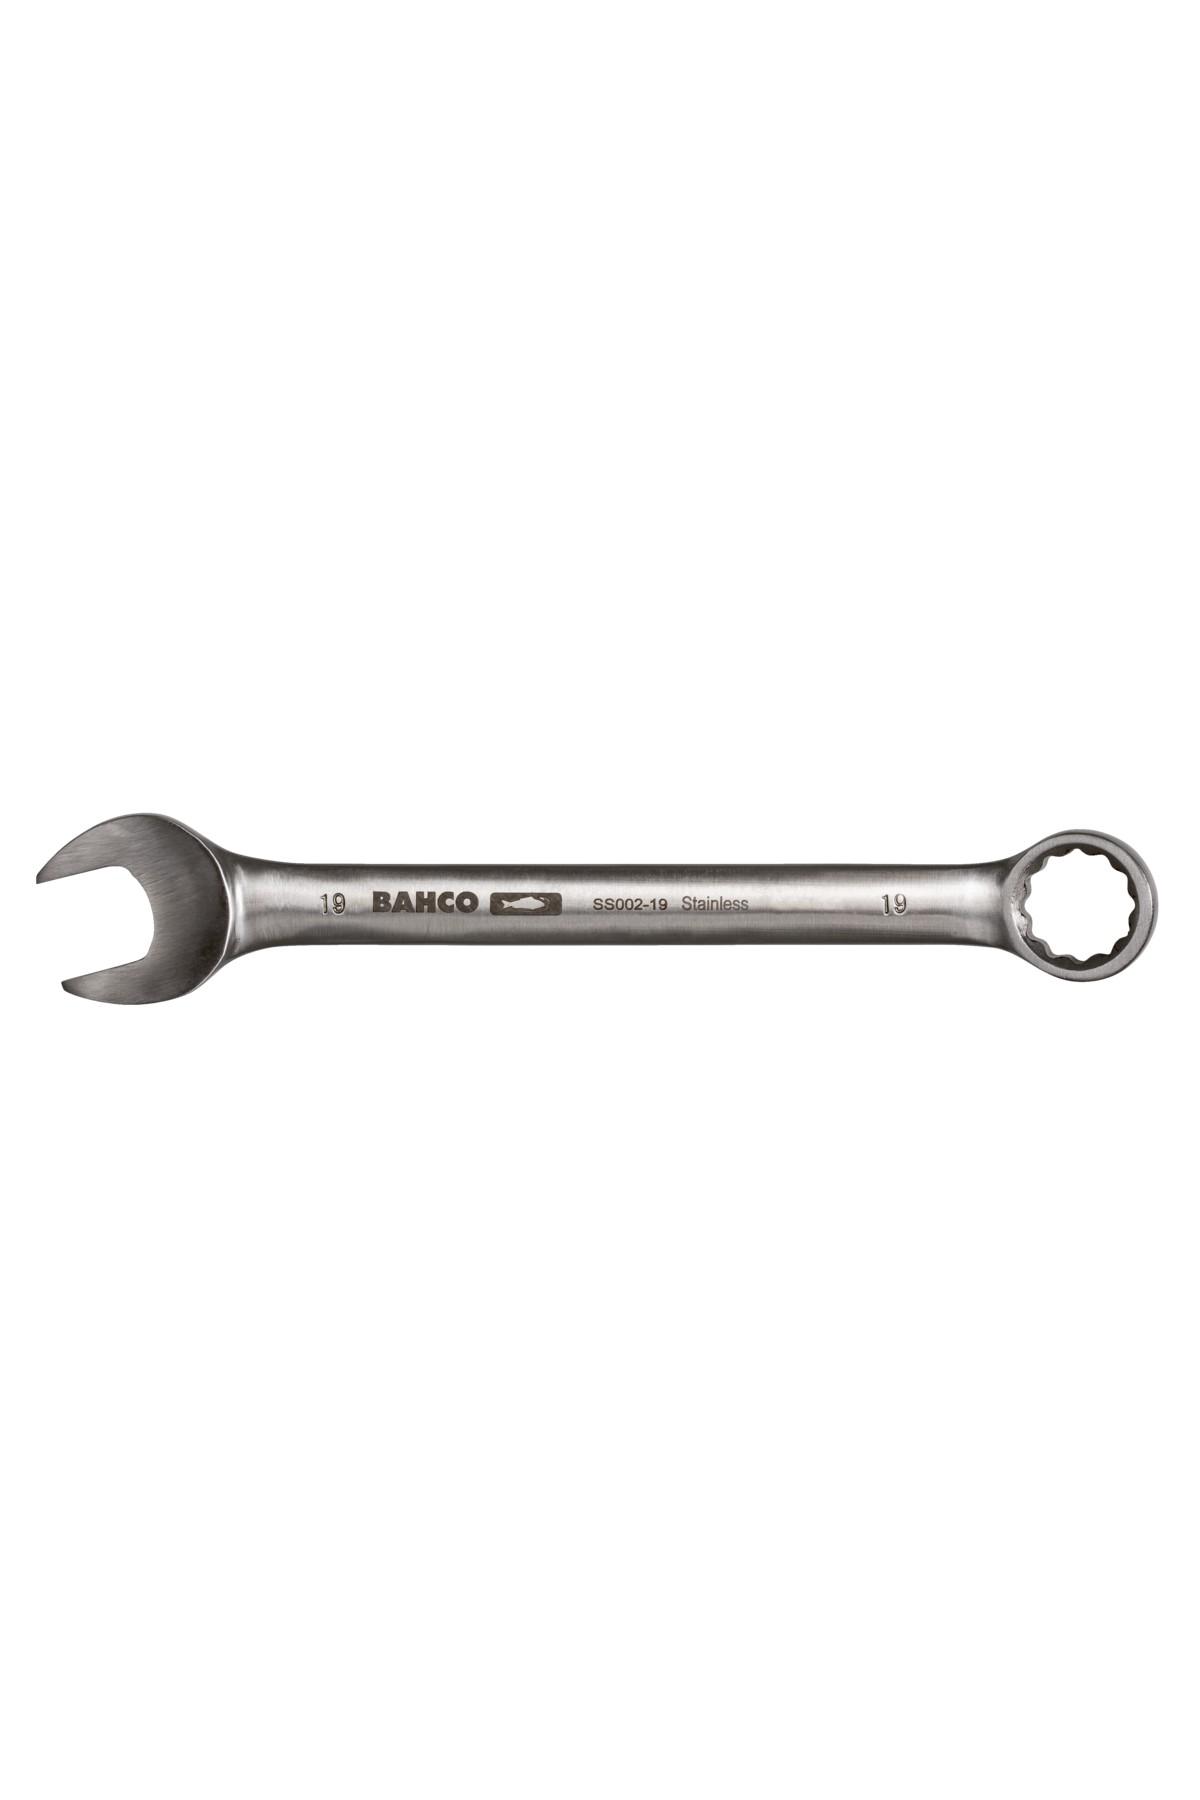 Ring spanner stainless 12mm